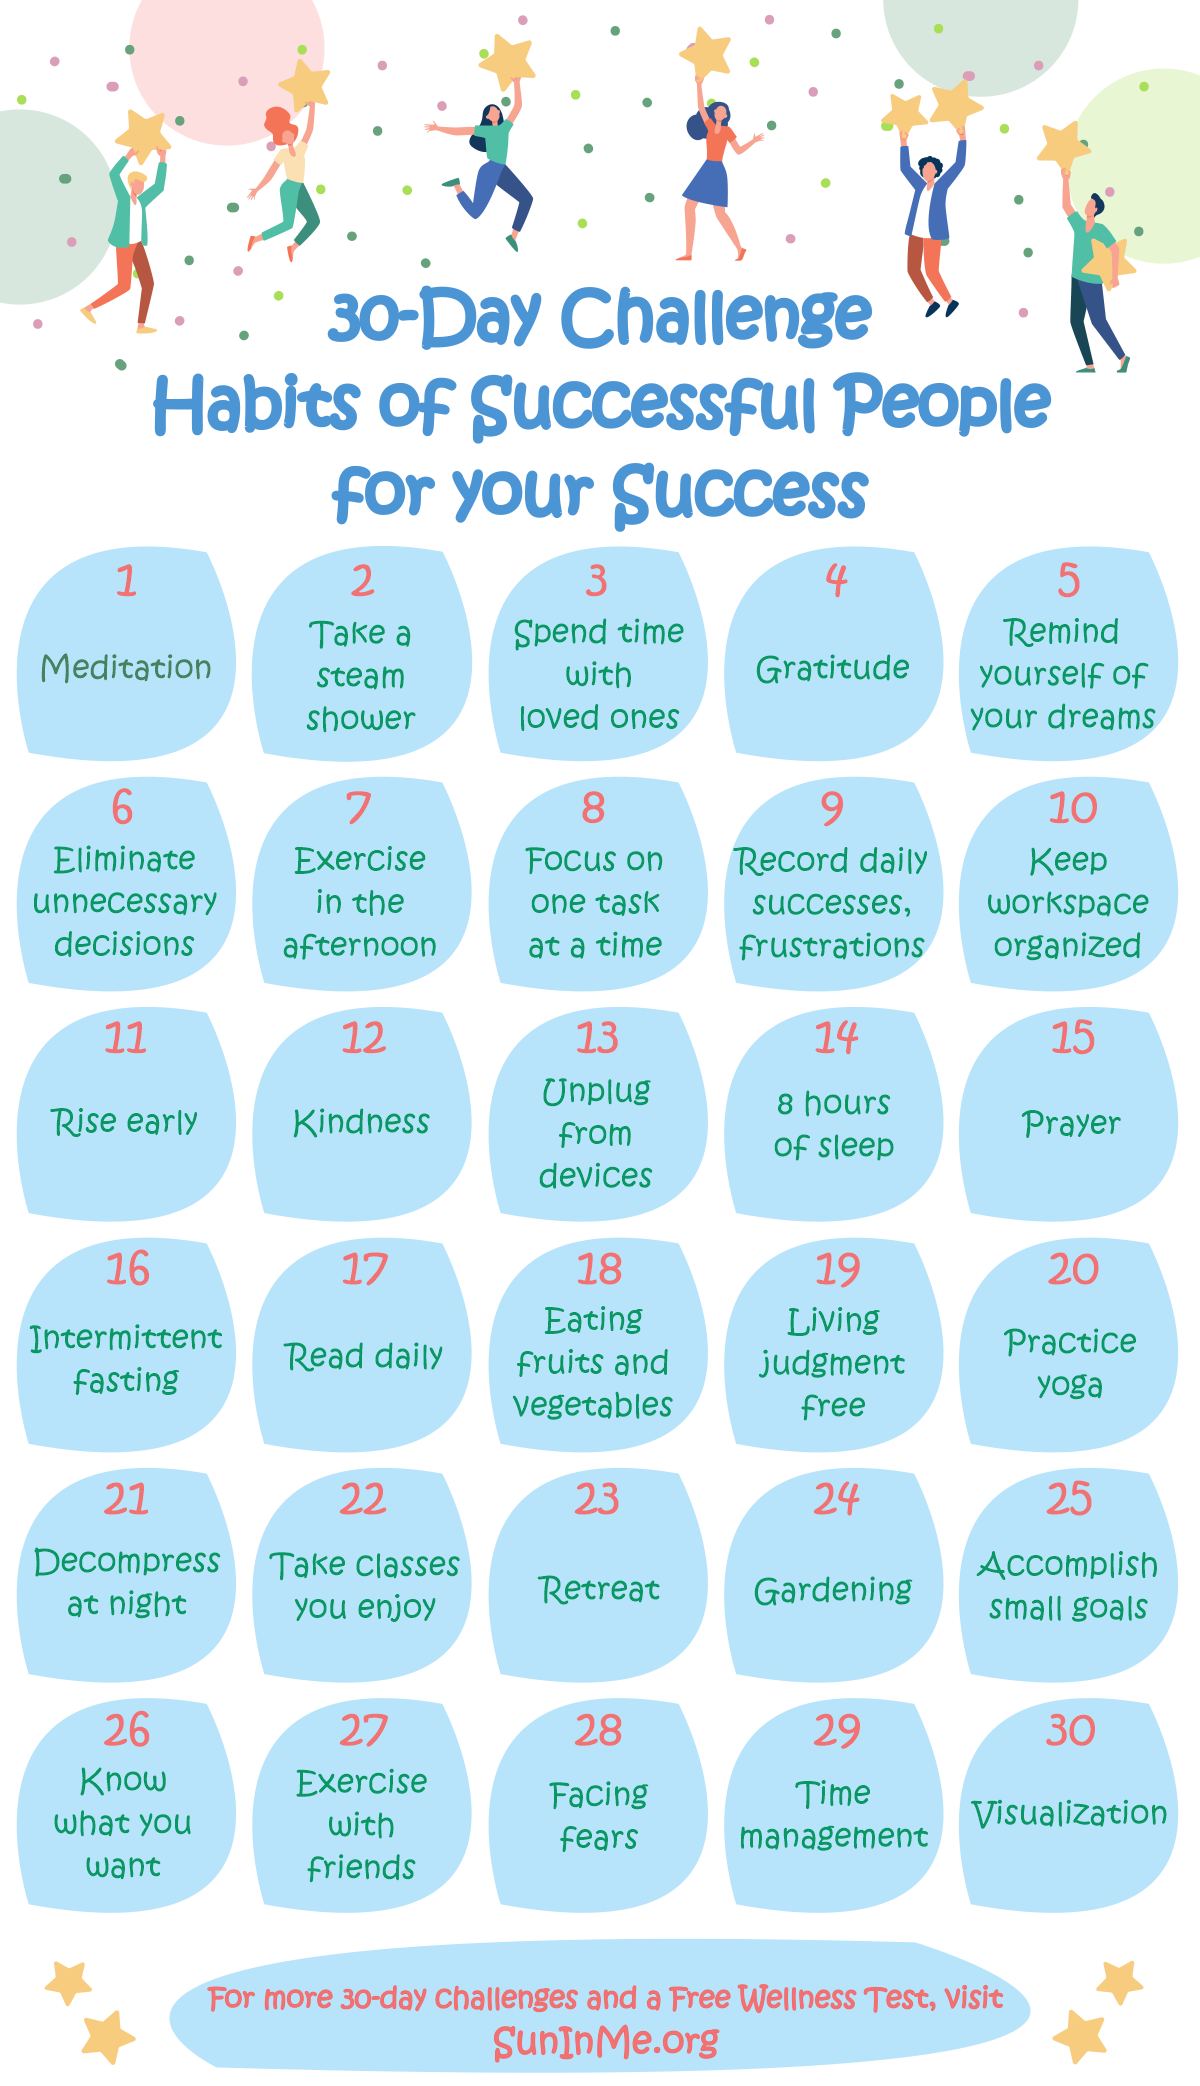 30-Day Challenge Plan for Habits of Successful People for your Success